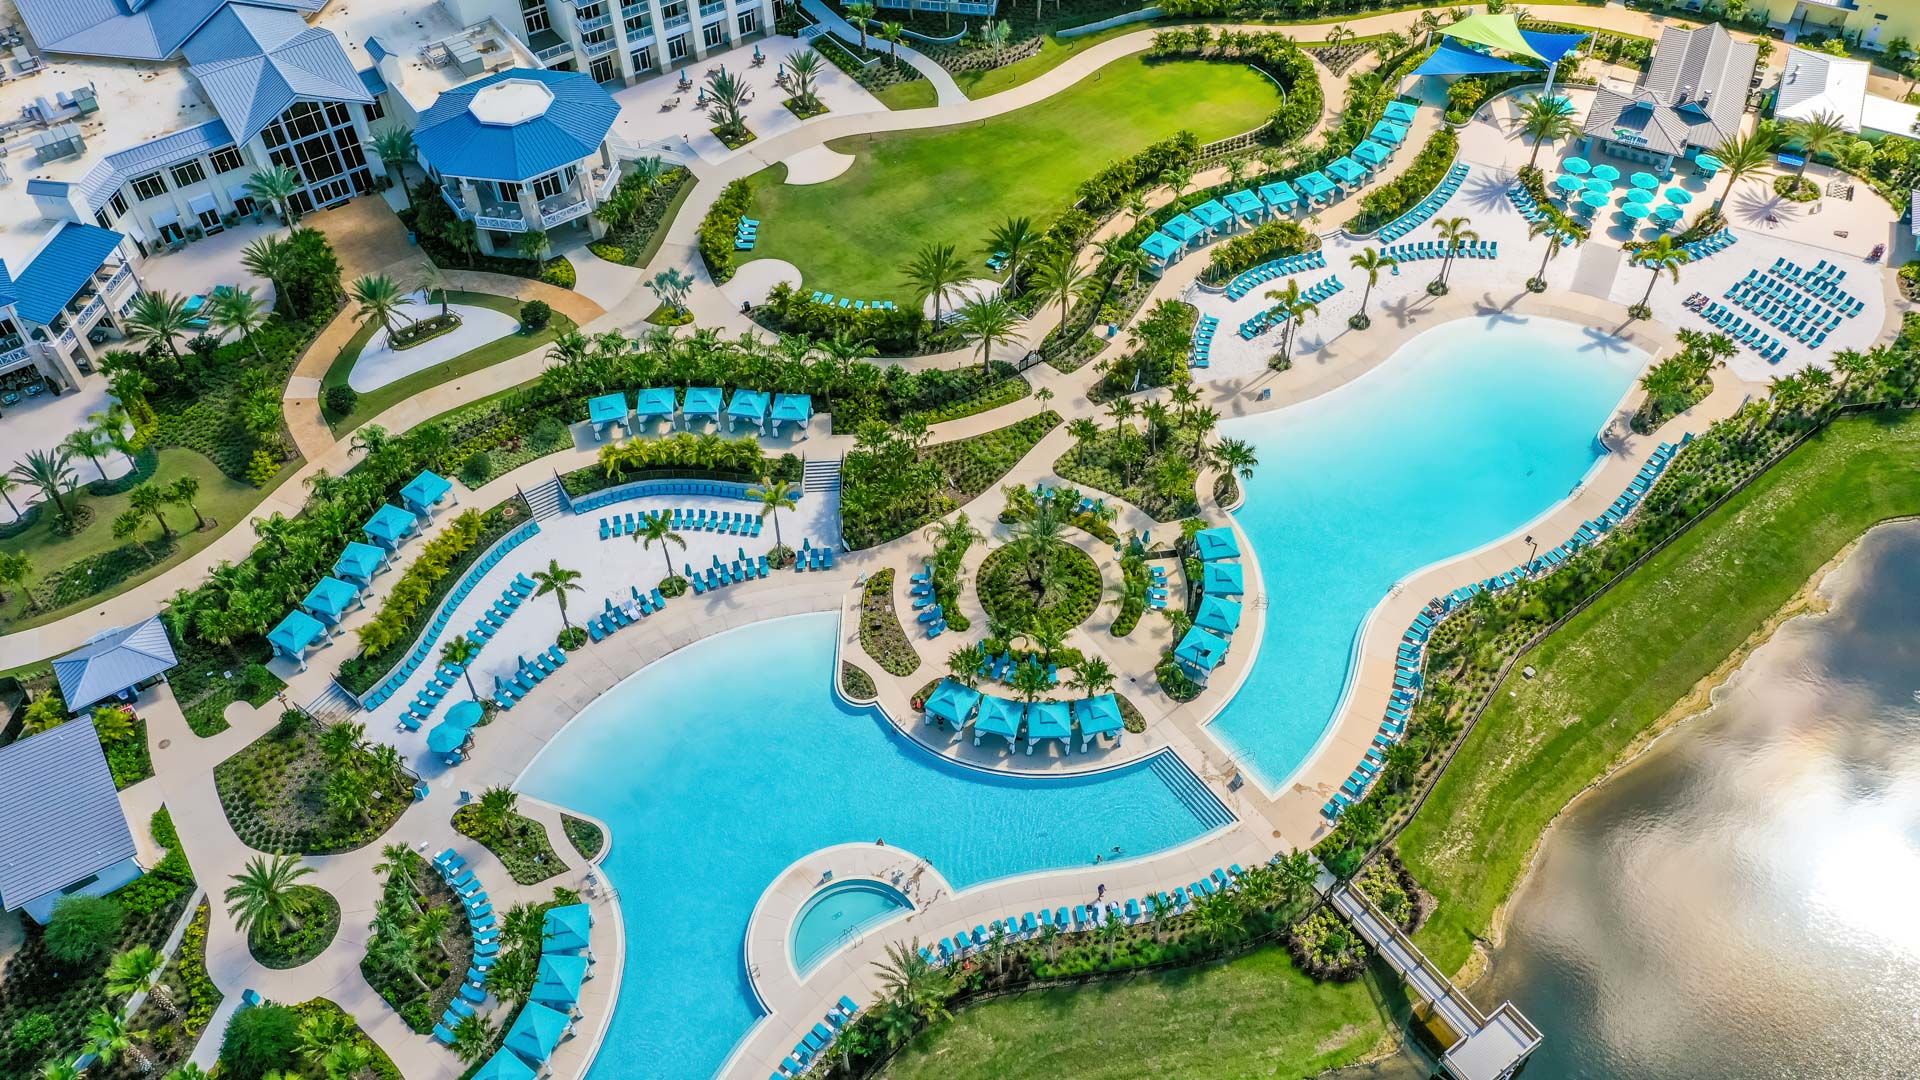 Aerial view of the Margaritaville Resort Orlando hotel, pools, and Fins Up Beach Club area.